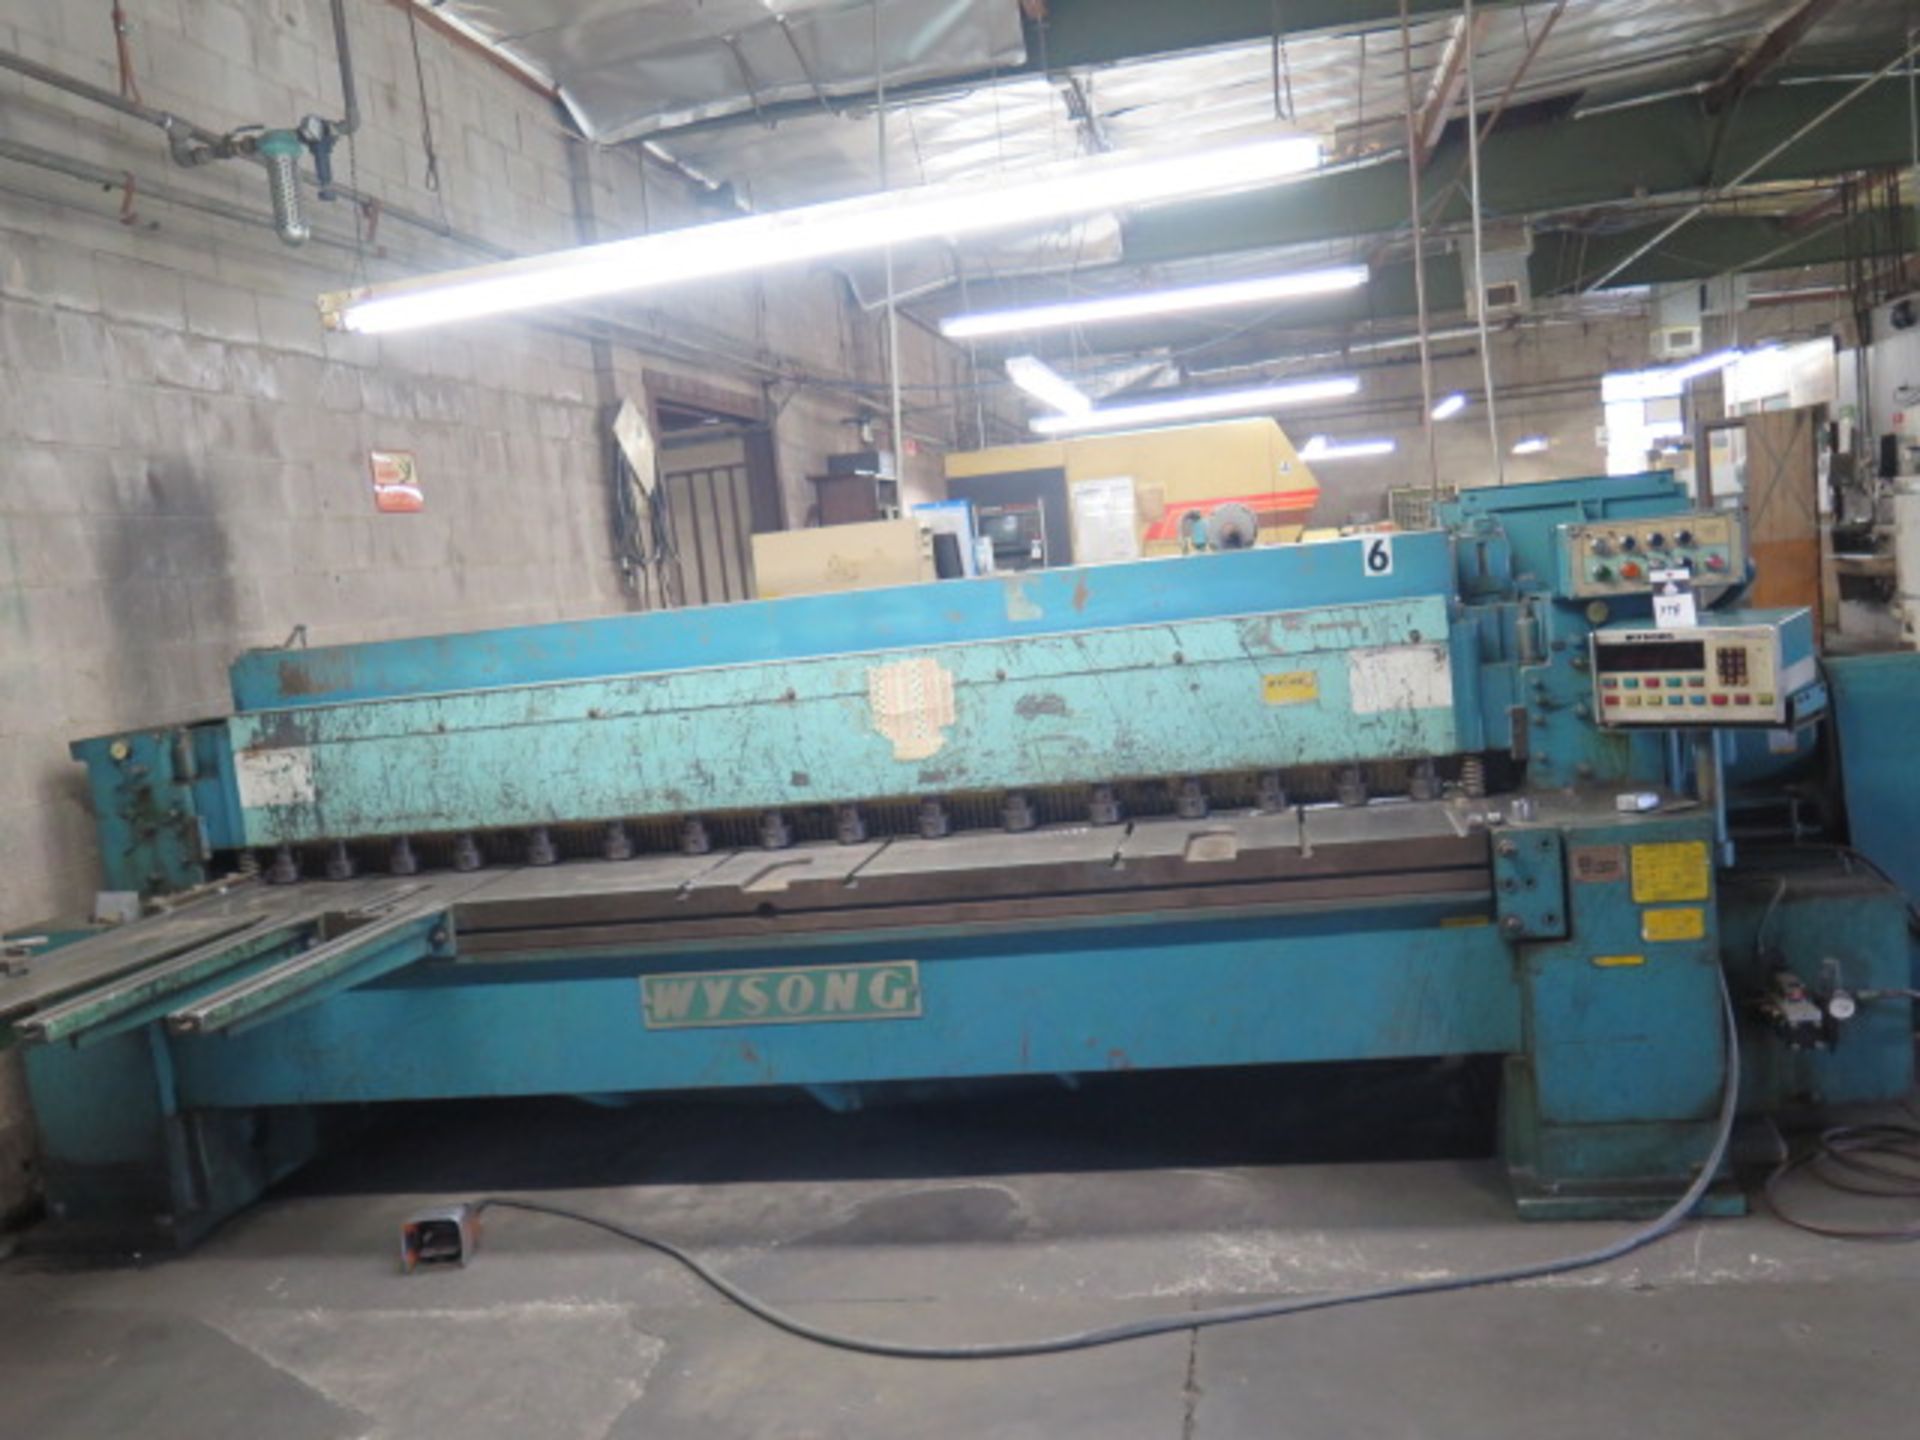 Wysong mdl. 1025 ¼” x 122” Power Shear w/ Wysong Controls and Back Gauging, 128” Sq Arm, SOLD AS IS - Image 9 of 10